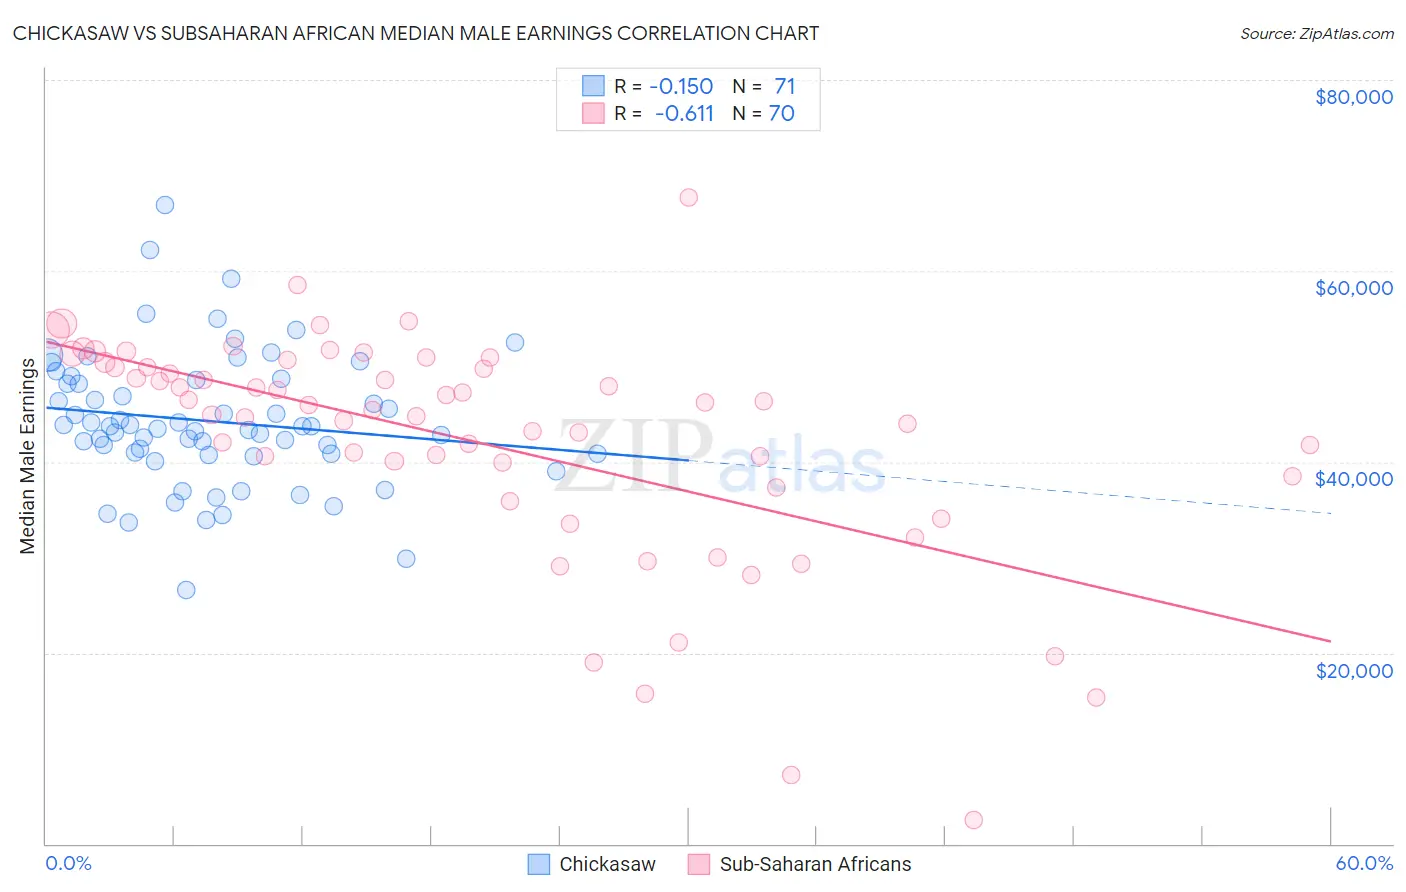 Chickasaw vs Subsaharan African Median Male Earnings